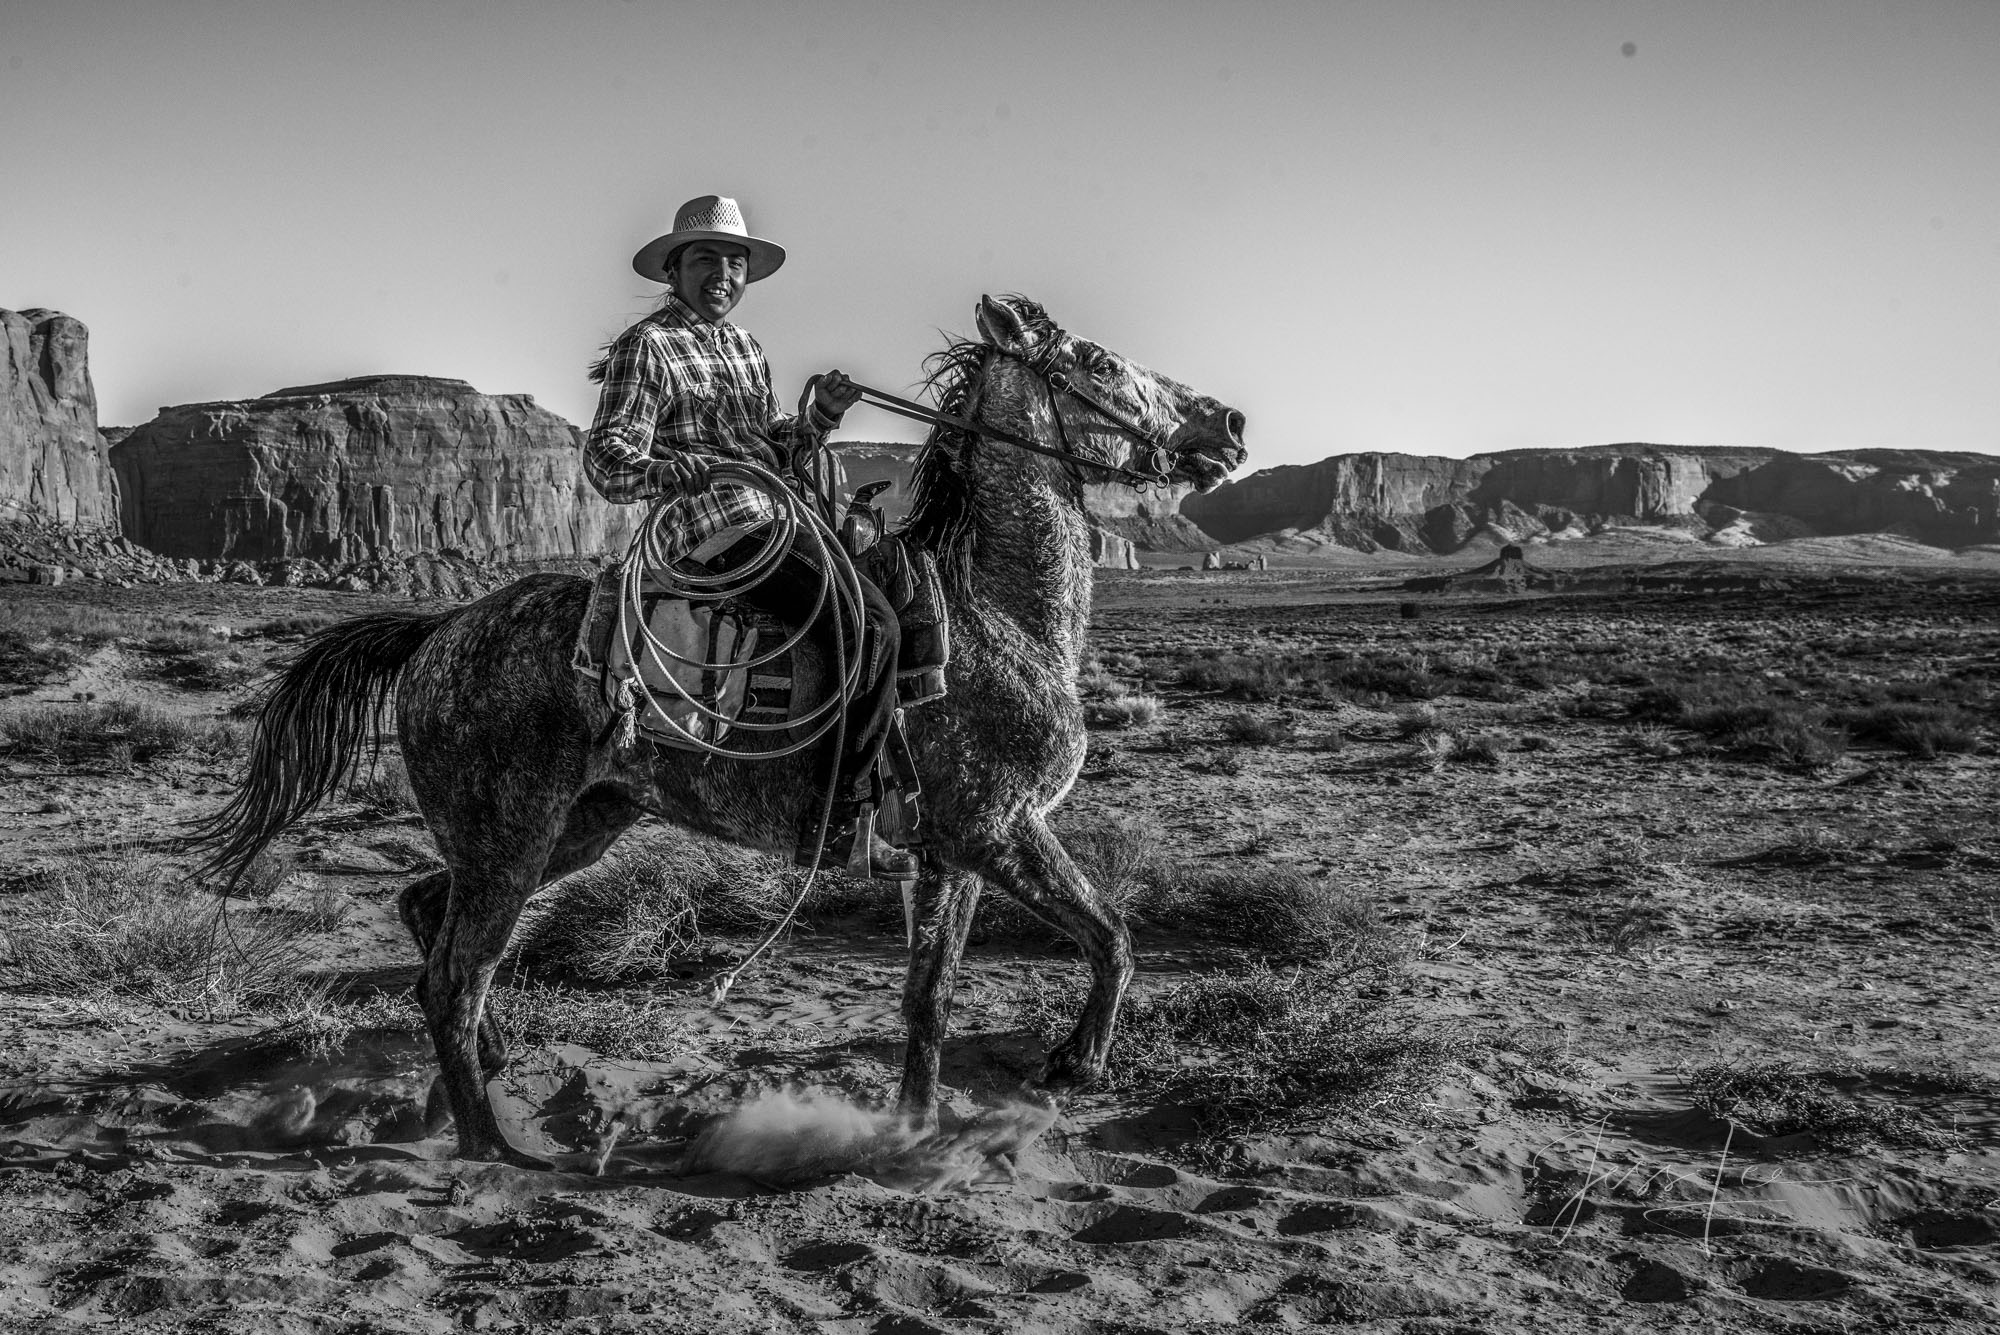 Fine Art Limited Edition Photo Prints of Cowboys, Horses, and life in the West. Navajo Cowboy, Cowboy pictures in black and white...